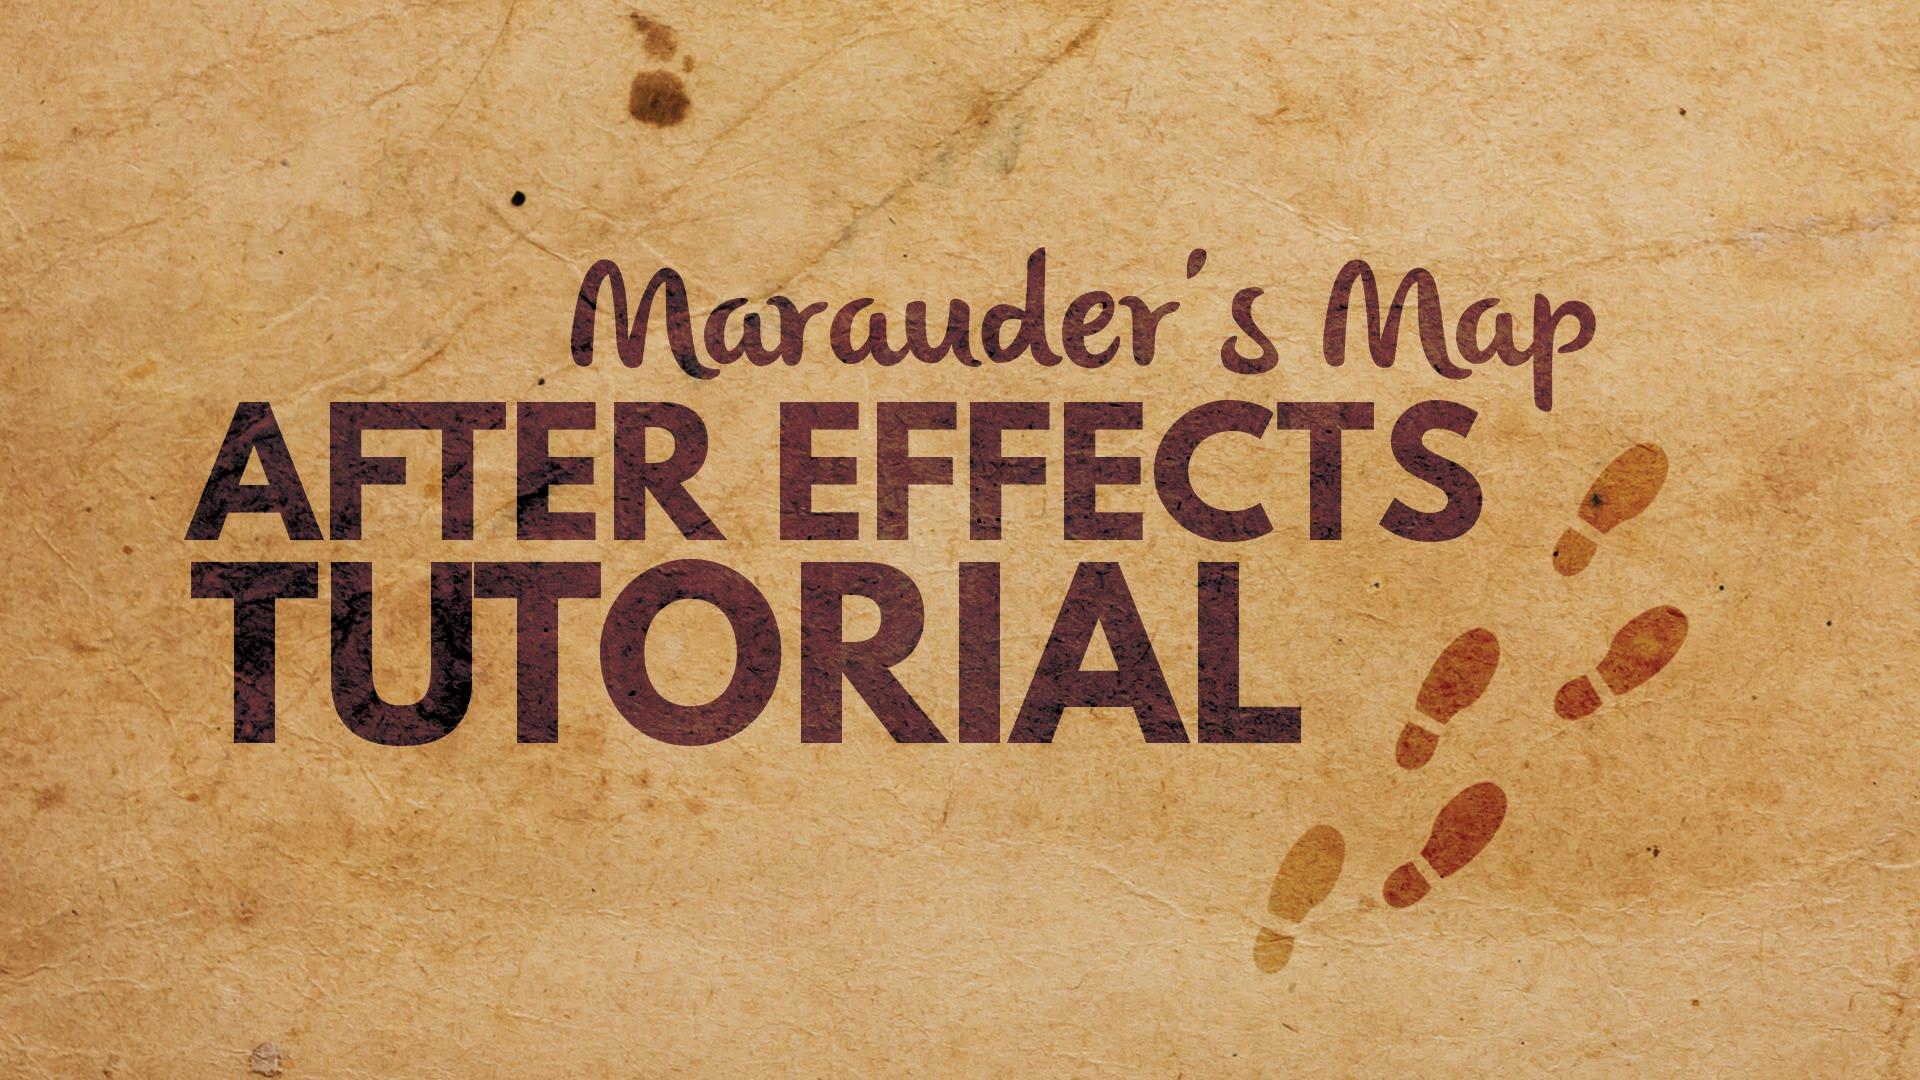 Marauder's Map Footprint Tutorial in After Effects